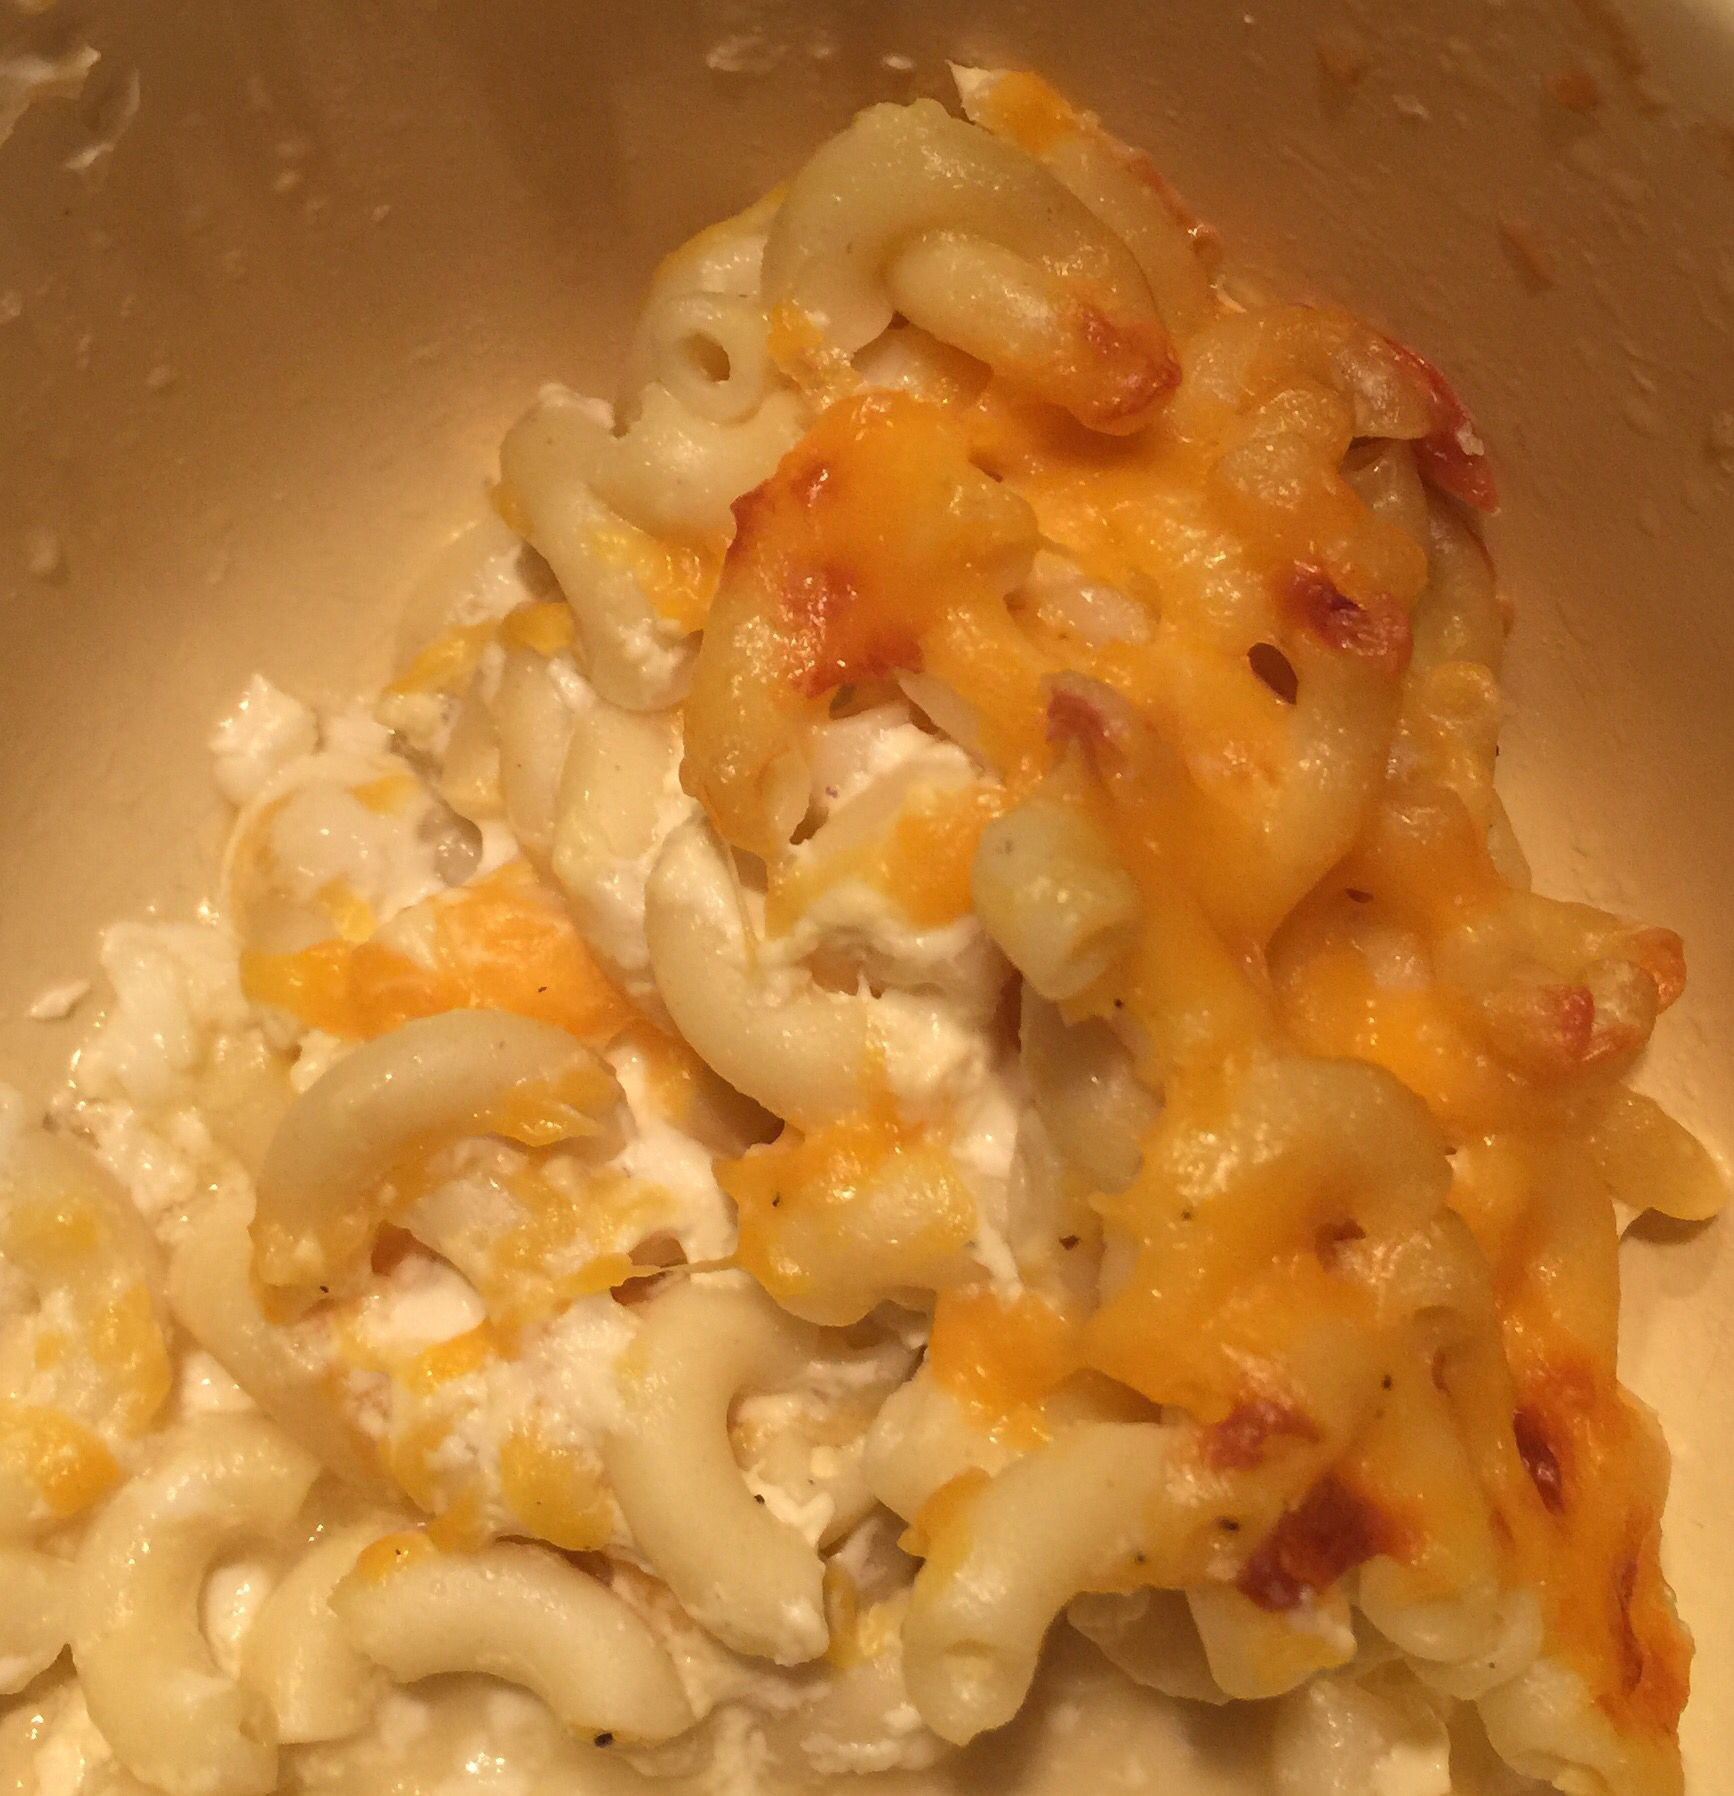 Baked Macaroni And Cheese Recipe With Eggs
 Old fashioned Mac and cheese 8 oz box macaroni noodles